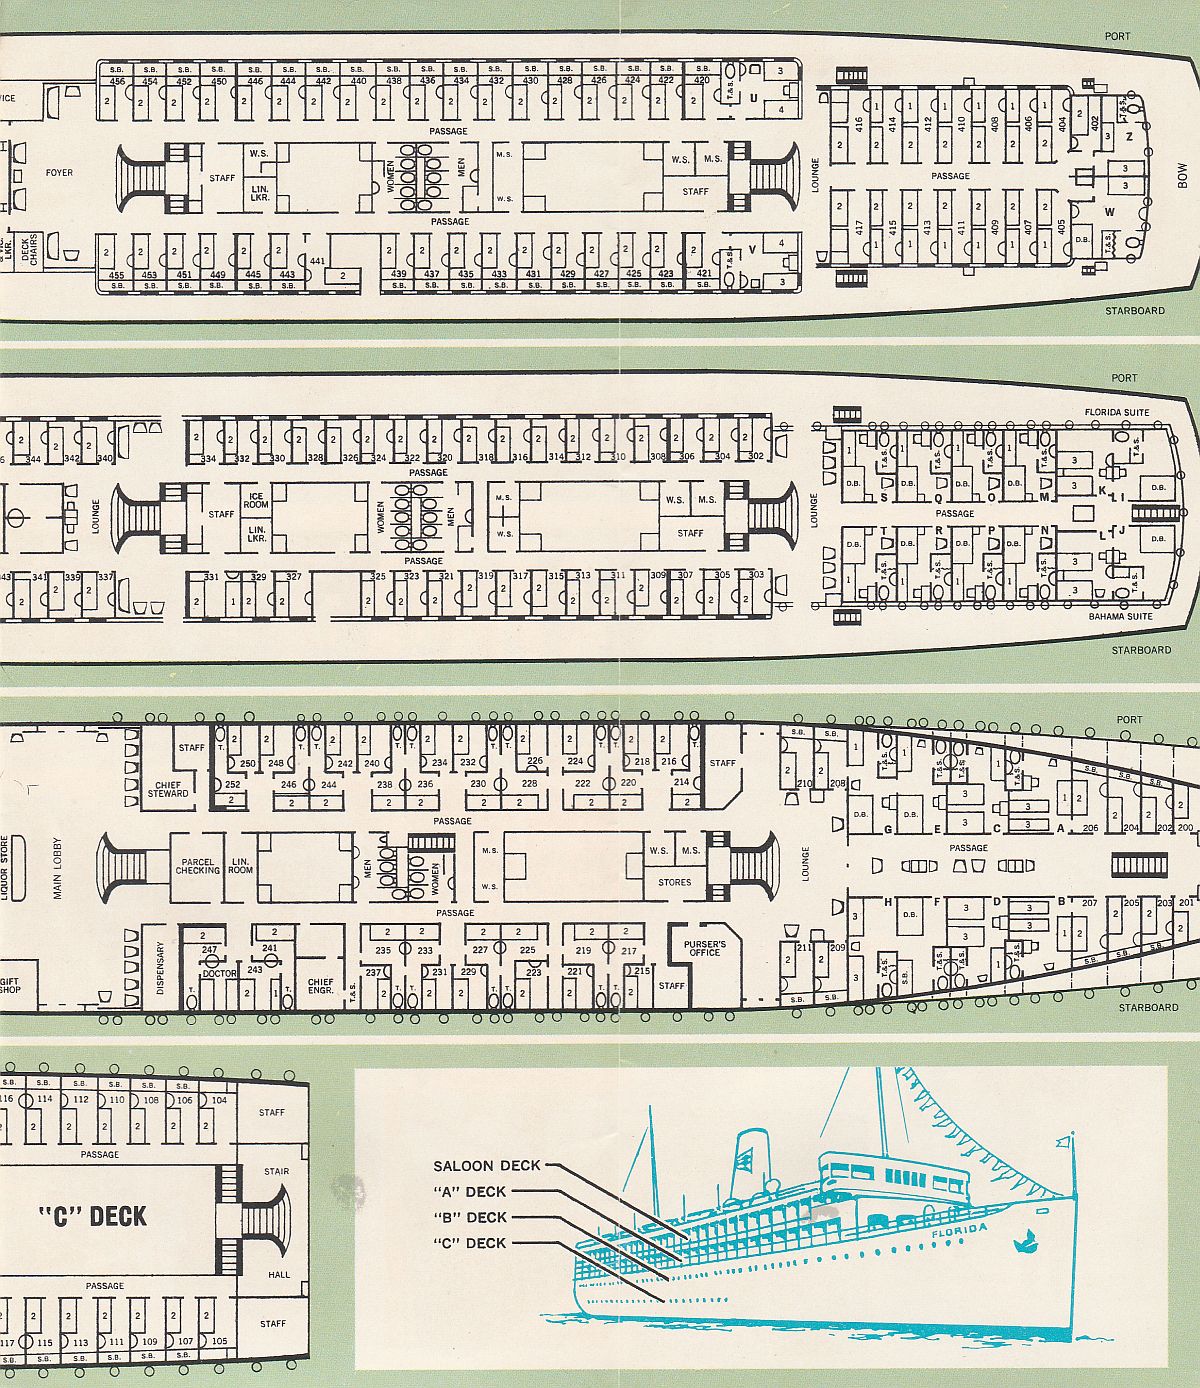 ss Florida Deck plans (cont'd): Forward and midship section of Saloon, A,B and C-deck plans